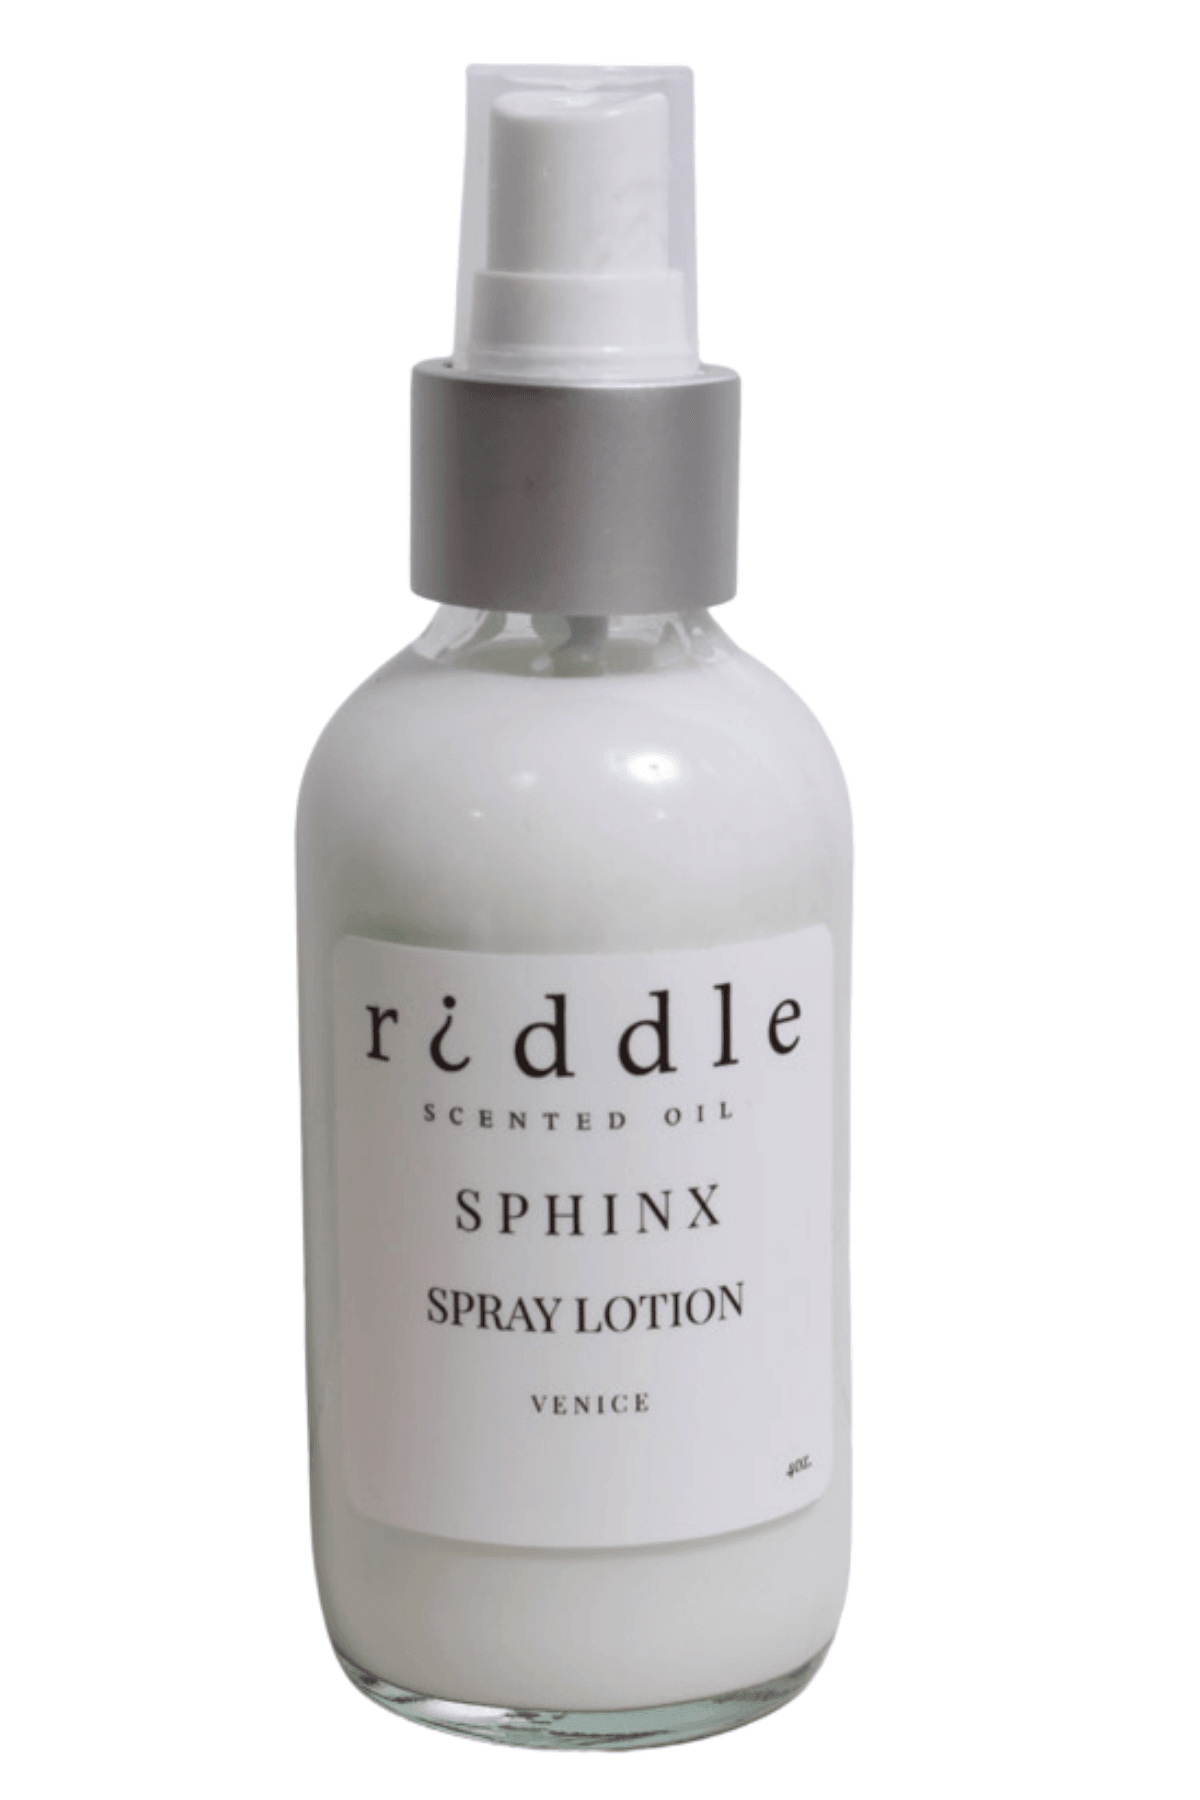 4 oz bottle of light and silky spray lotions by Riddle in Sphinx fragrance